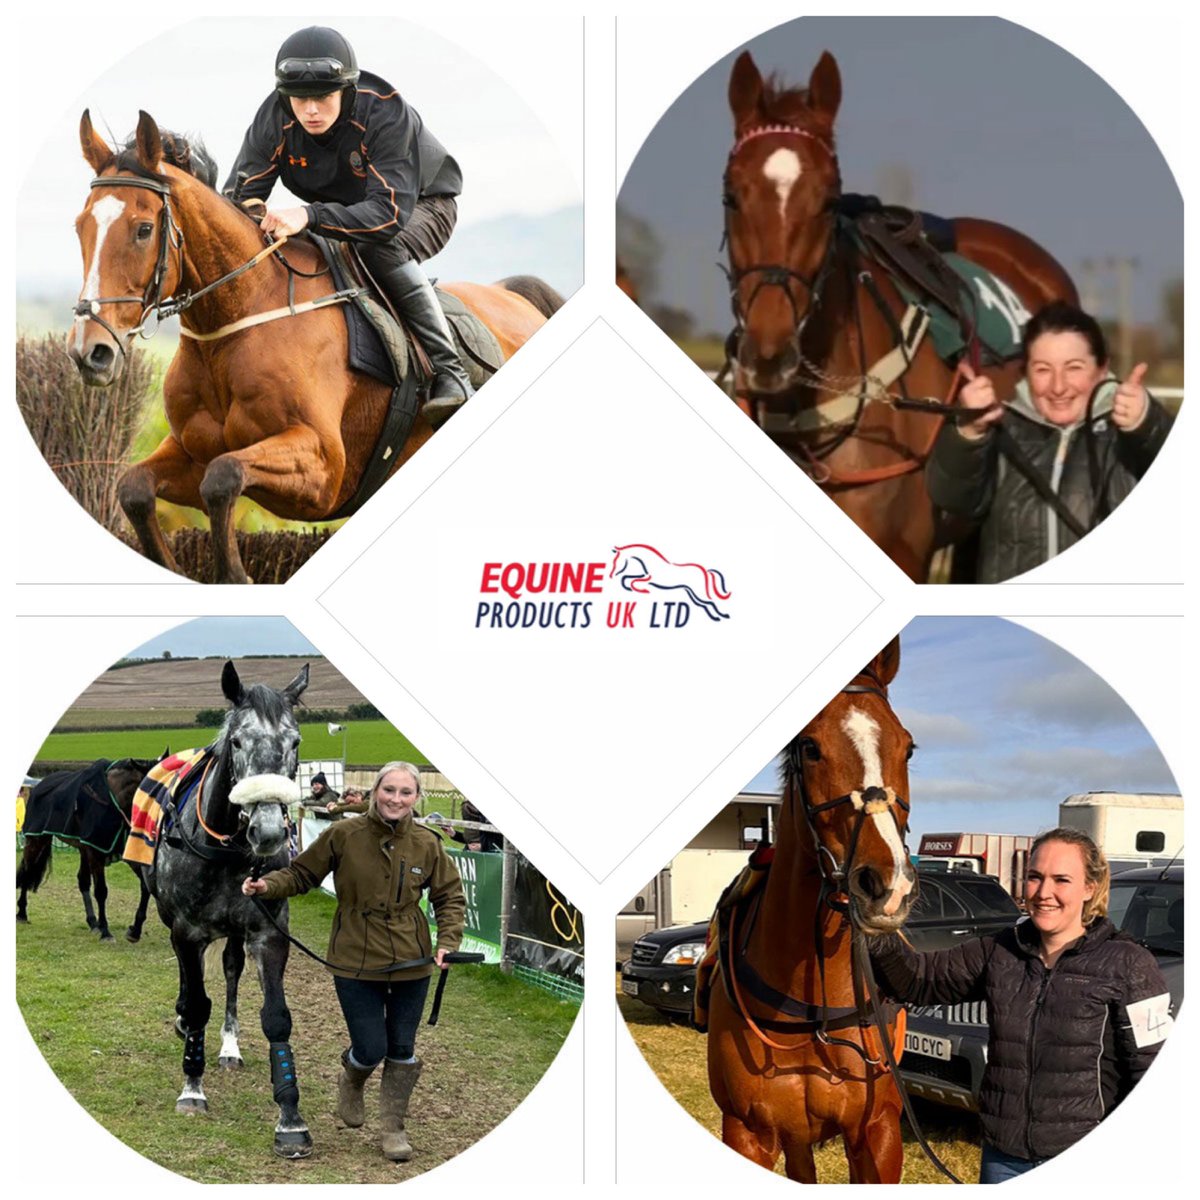 VOTE FOR YOUR @equineprodsuk STABLE EMPLOYEE OF THE YEAR A new award for the unsung heroes. Now it’s your turn to vote on gopointing.com/stable-employe… The 3 stable employees with the most votes will be invited to the National Dinner & Dance on Sat 29 June. #GoPointing